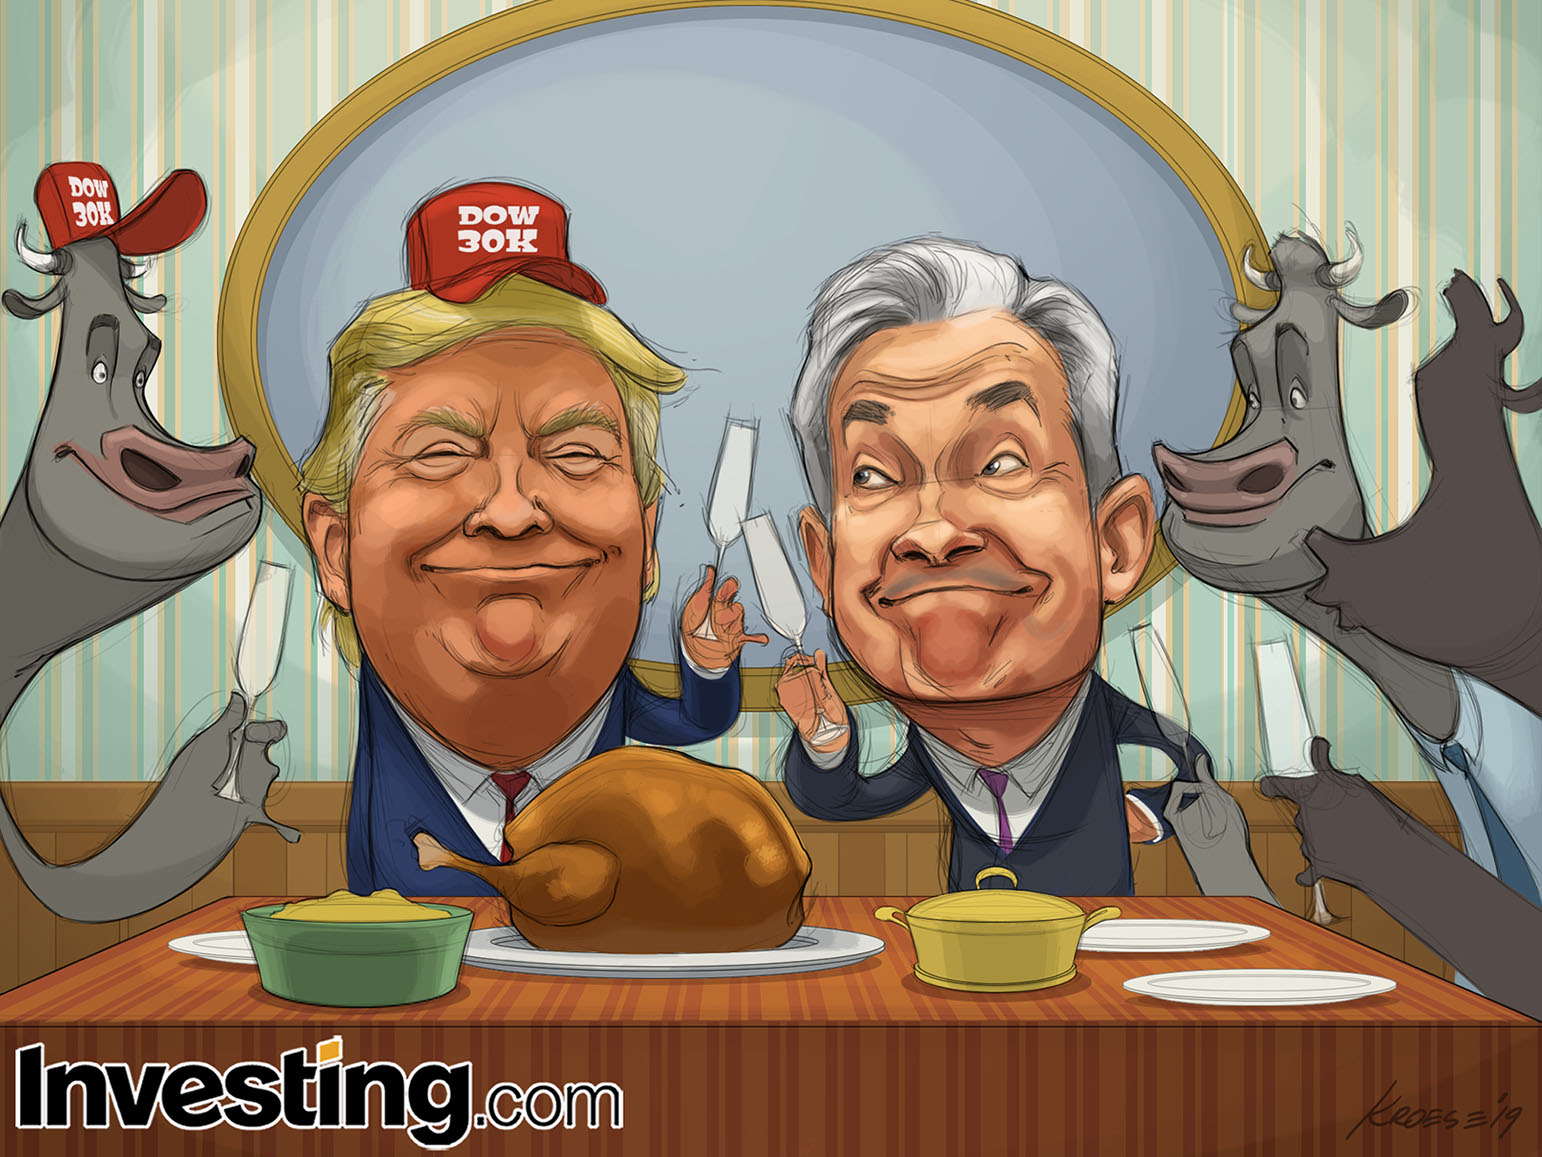 Stock Market At All-Time Highs Has The Bulls (And Trump) In A Festive Thanksgiving Mood